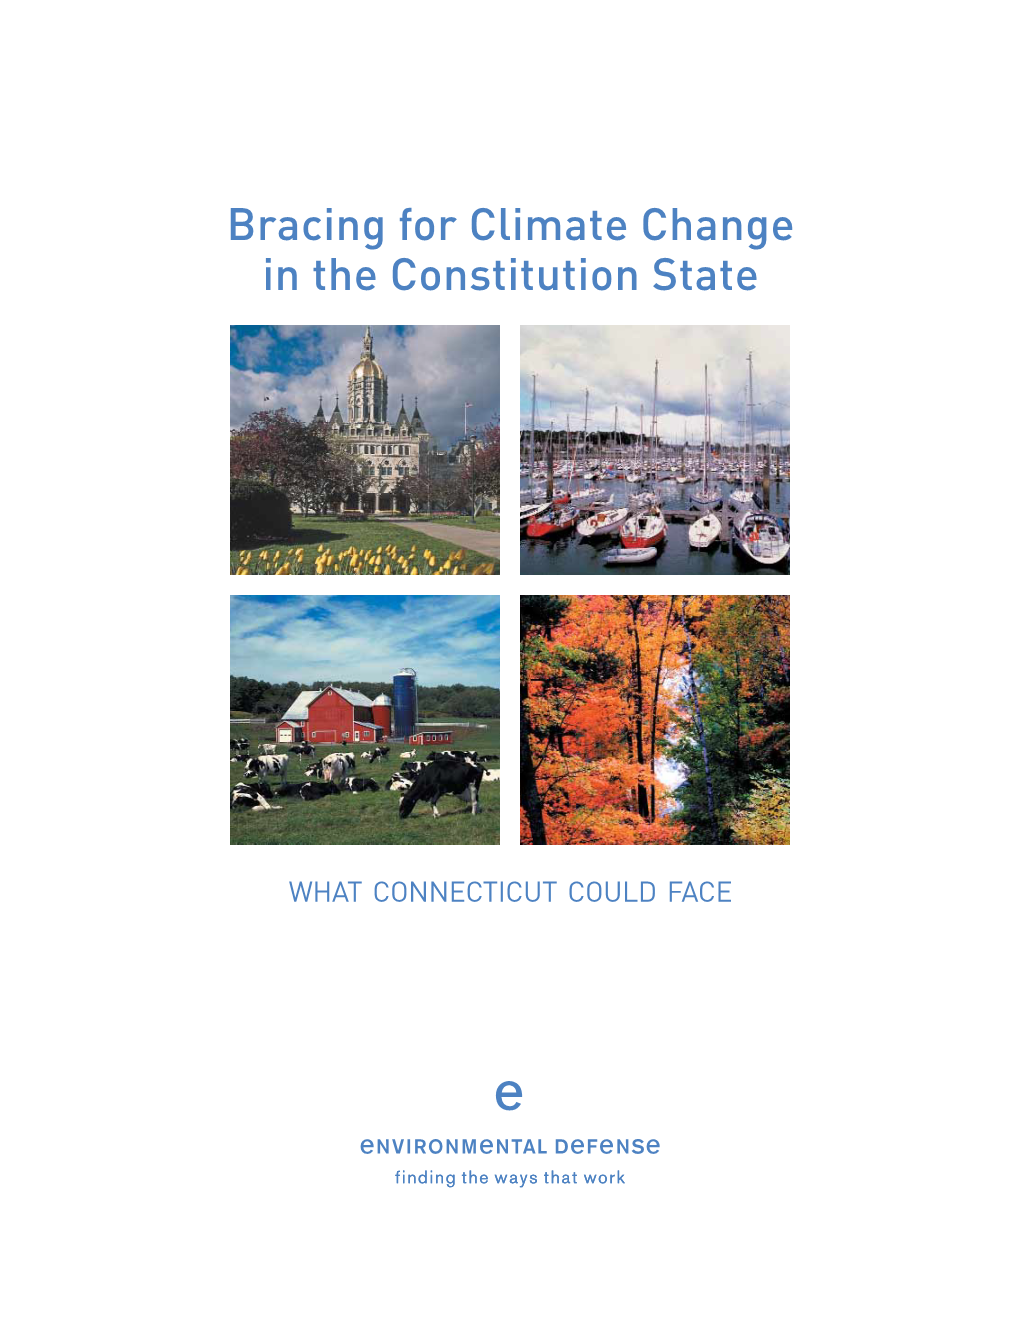 Bracing for Climate Change in the Constitution State